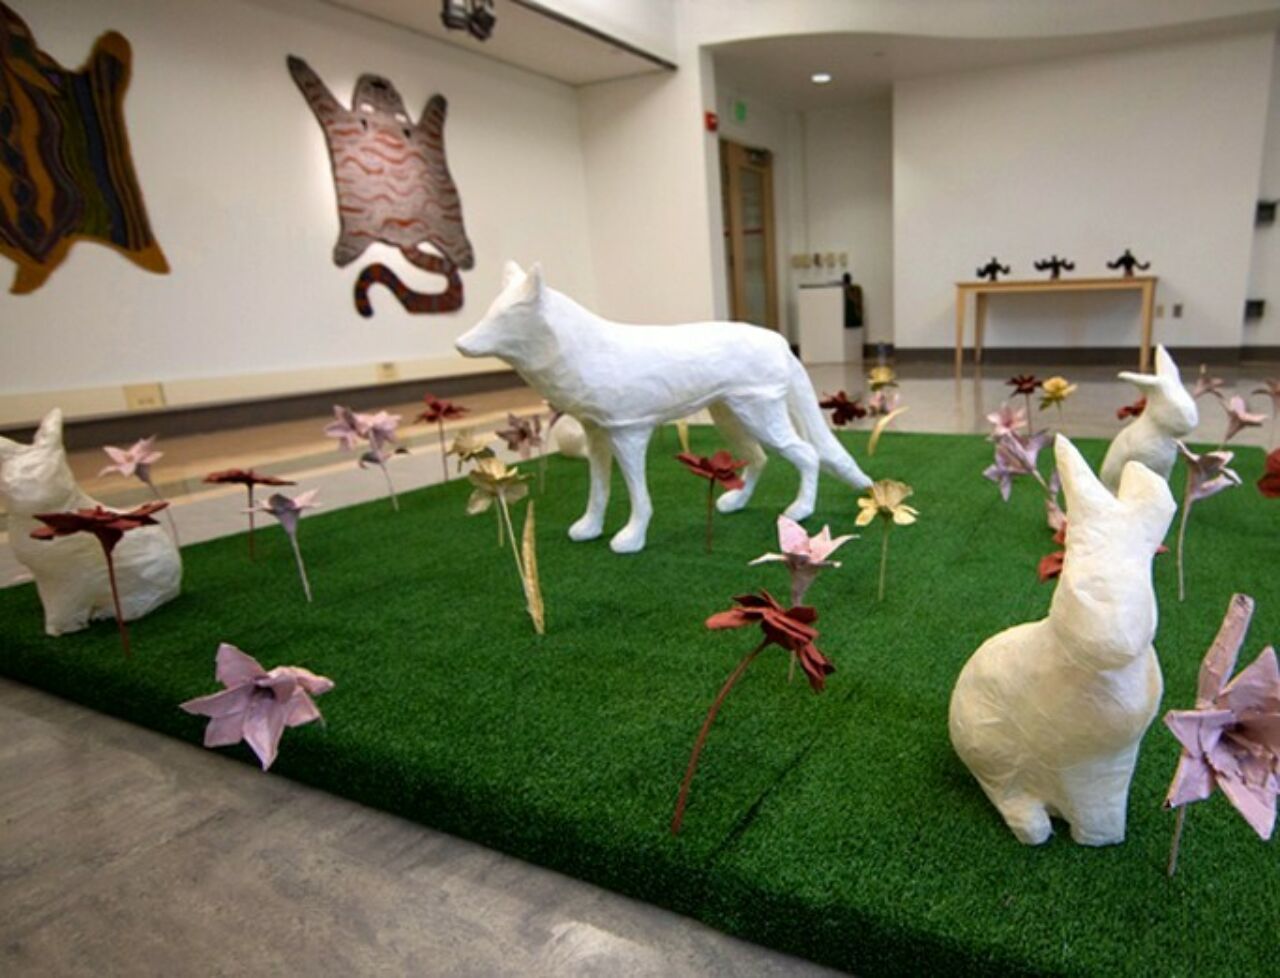 Installation created by Ryan Lawson, showcasing a wolf, rabbit and other animals and colorful flowers on a platform of artificial turf.